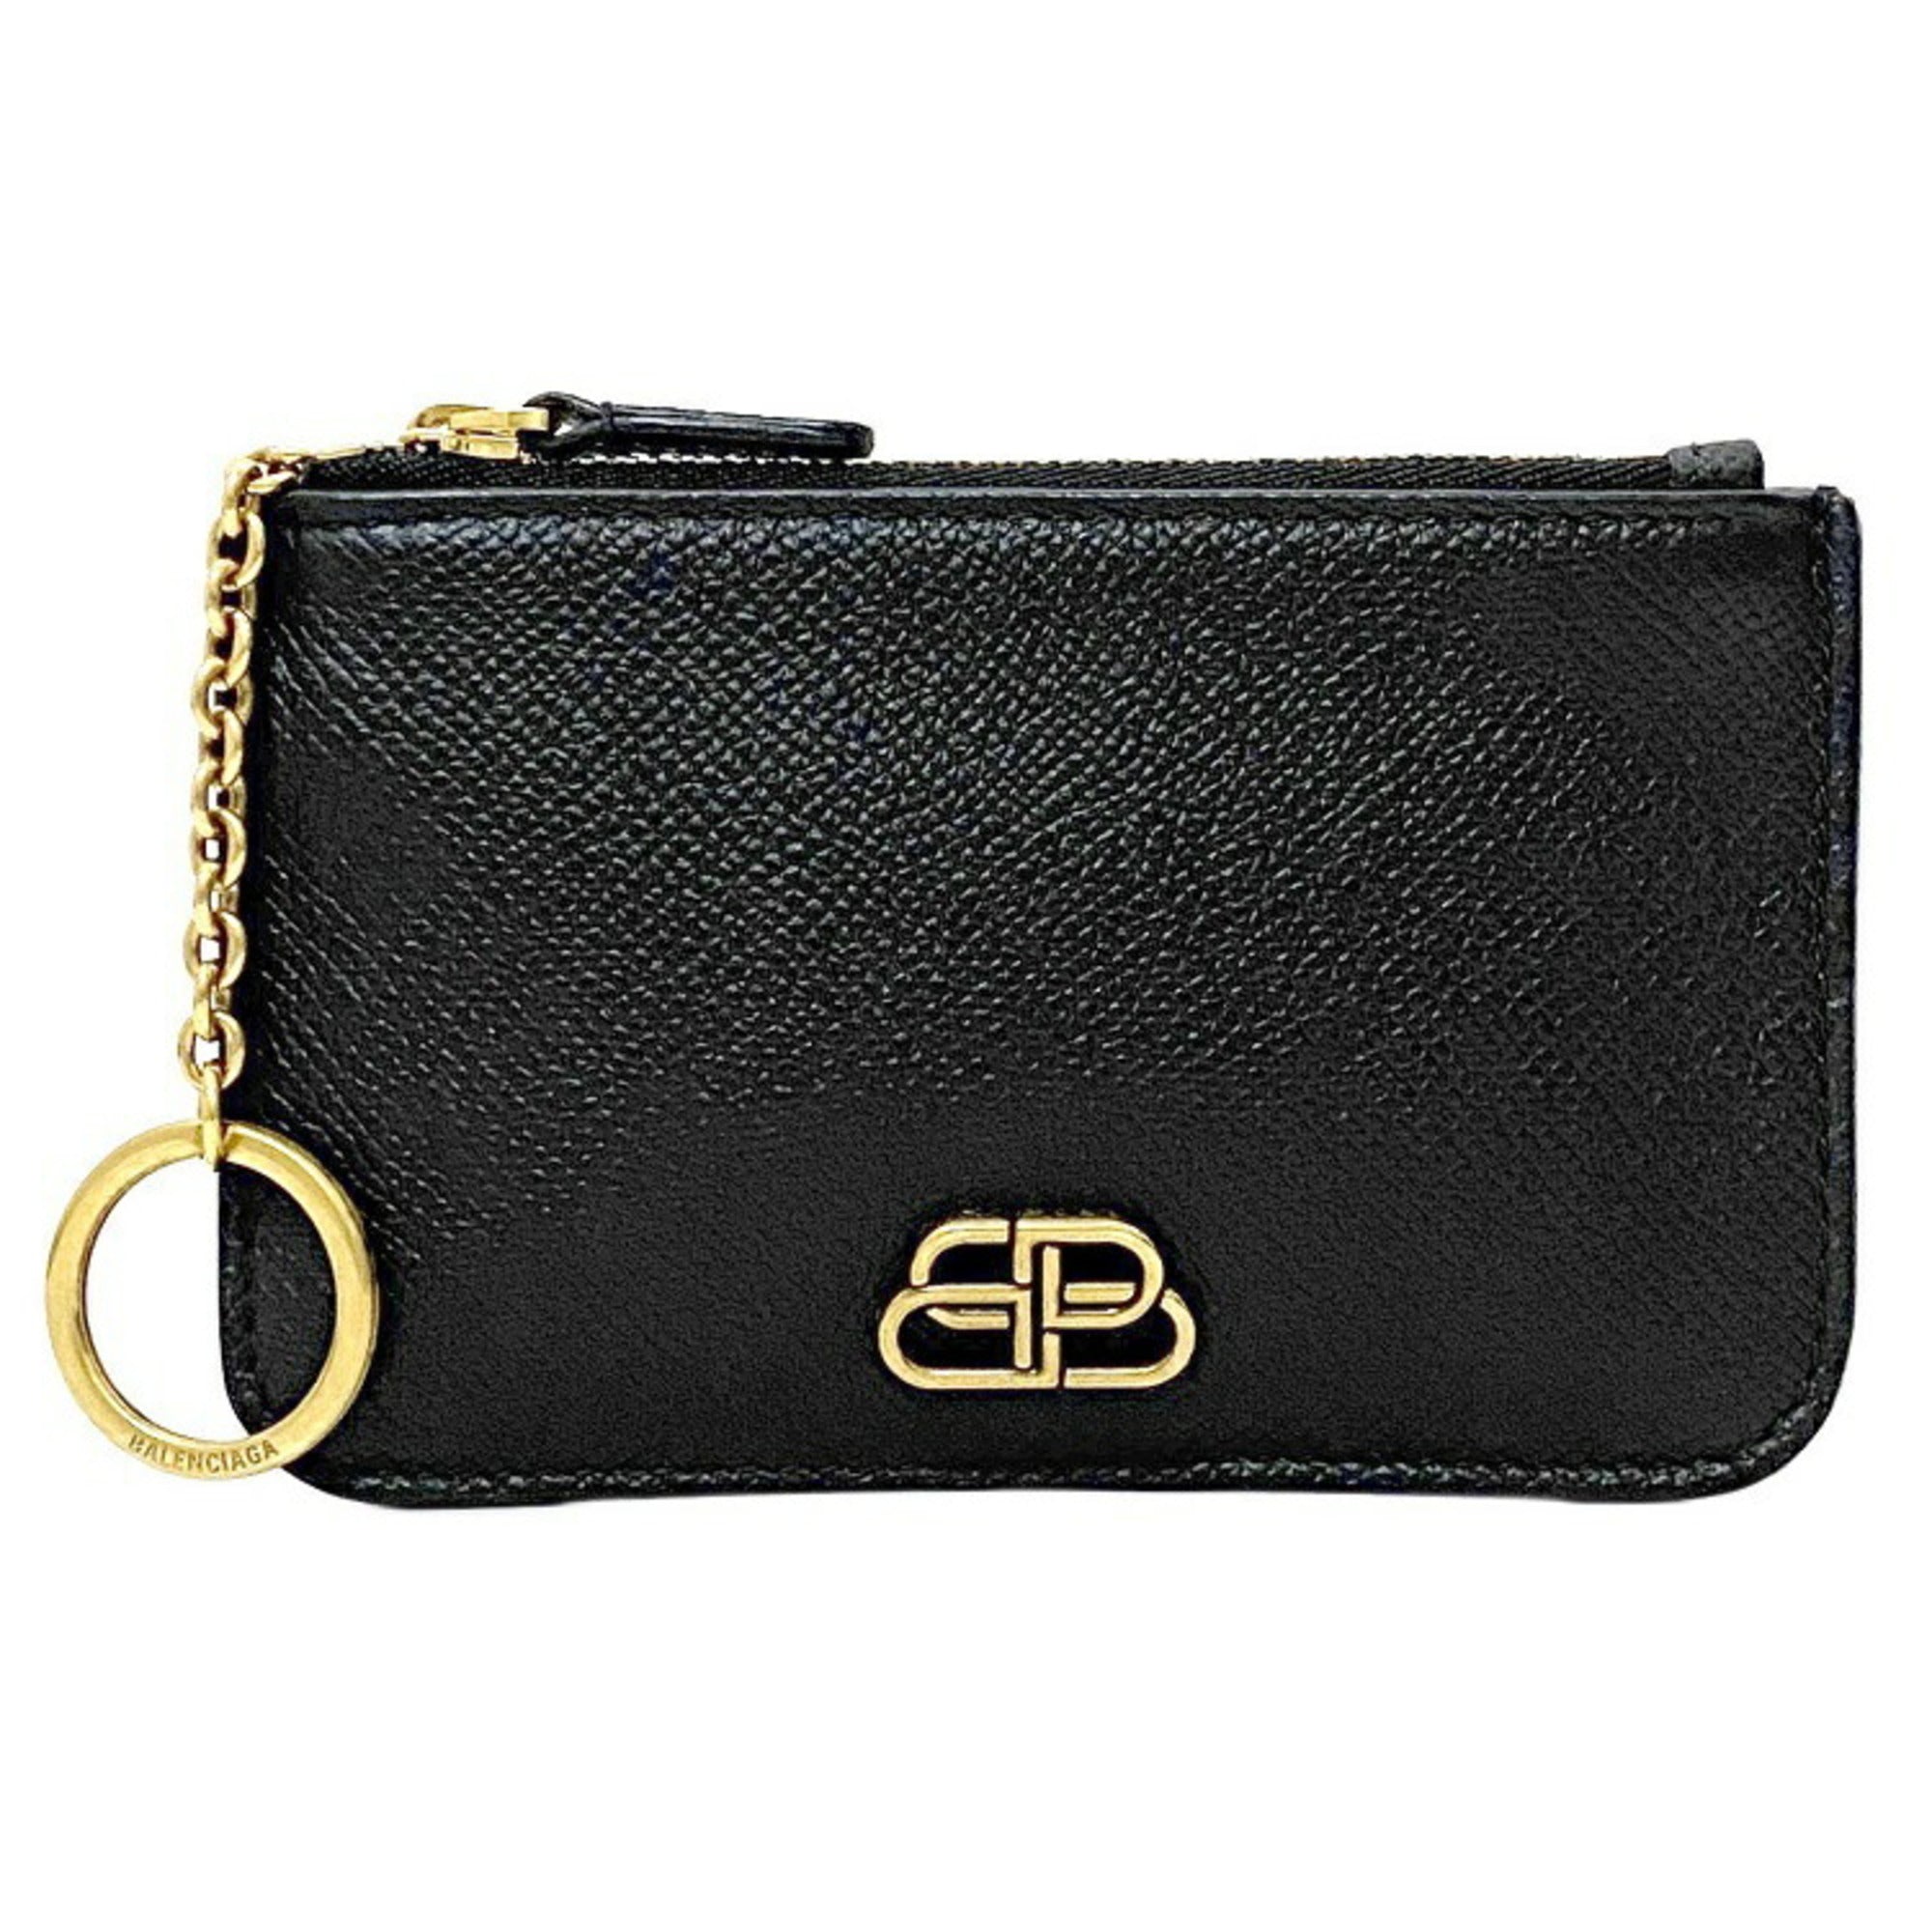 KEY POUCH KEY PURSES Designers Pouch Mini Wallet Fashion Wallet Womens Mens  Keychain Ring Credit Card Holder Coin Purse M62650 Wallet Purse From  Kaimenjianxixxj, $10.69 | DHgate.Com